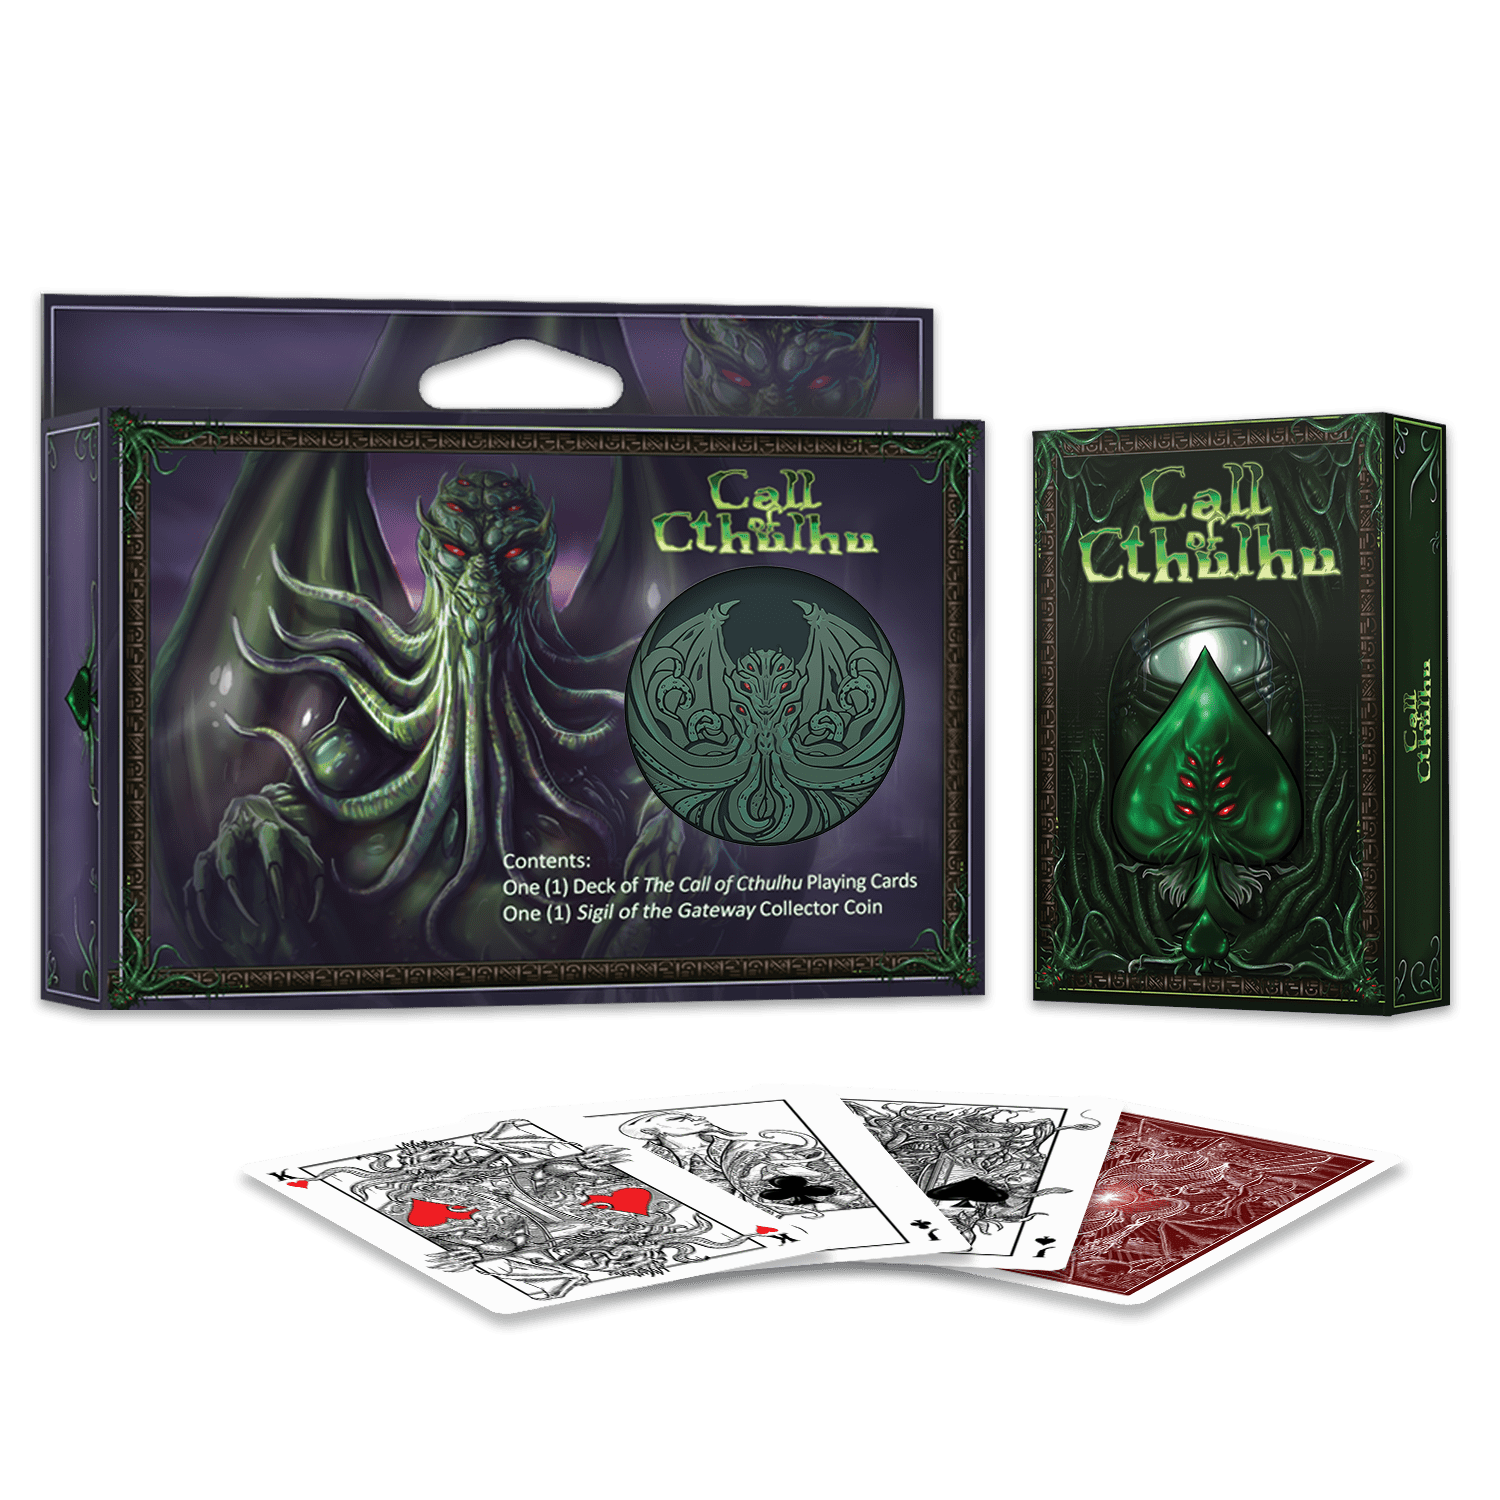 PlayingCardDecks.com-Call of Cthulhu Playing Cards & Collectible Coin